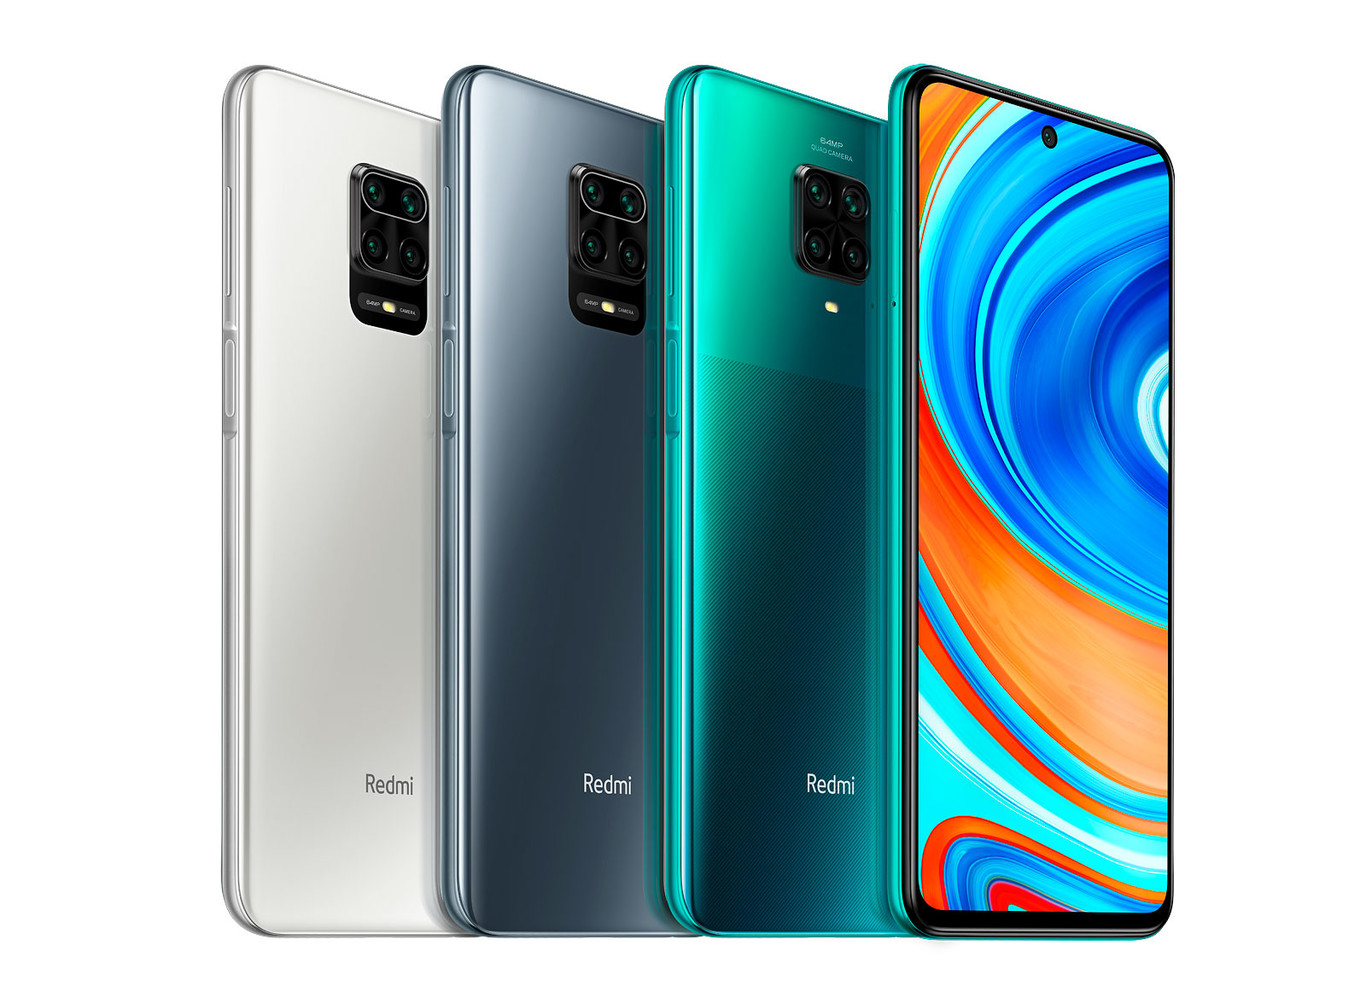 Price and availability of the Xiaomi Redmi Note 9 Pro